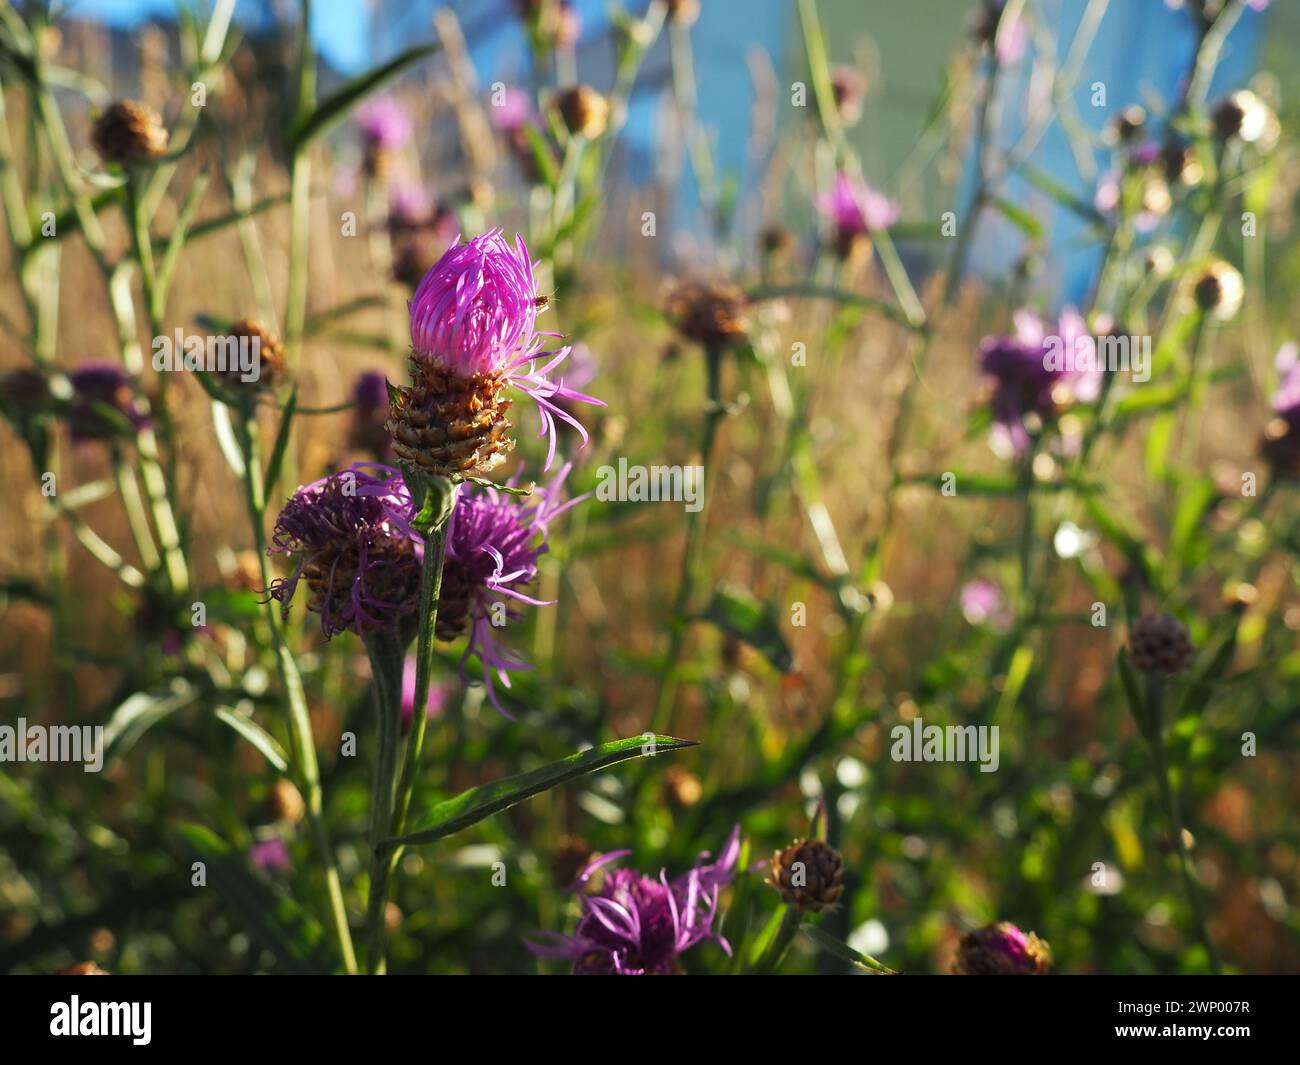 Thistle, Cirsium, genus of perennial or biennial herbaceous plants of the Asteraceae family, or Asteraceae. Purple wild flowers in the meadow. City Stock Photo